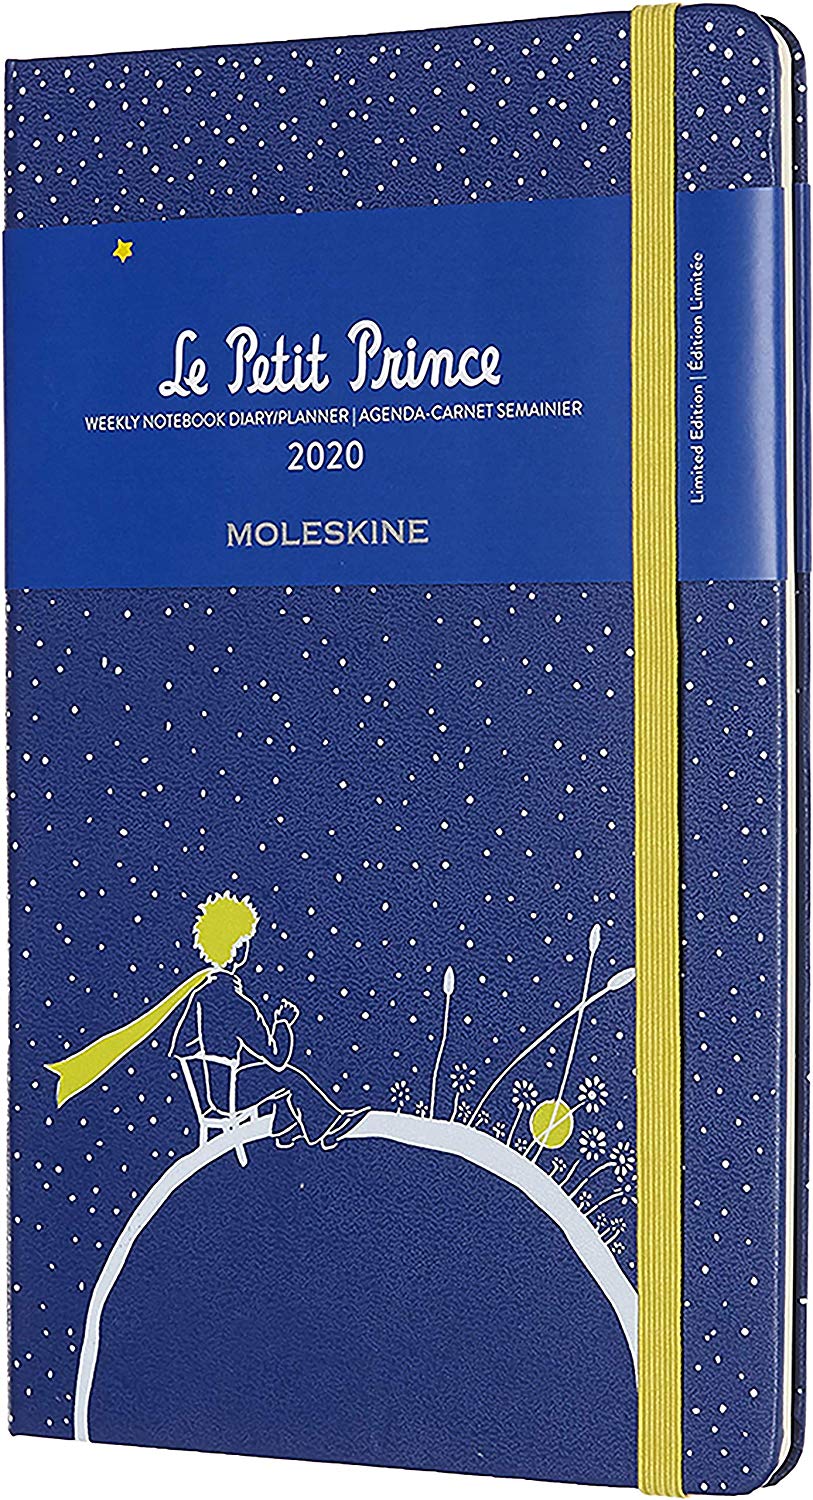 Agenda 2020 - Moleskine Limited Edition Le Petit Prince 12-Month Weekly Notebook Planner - Planet, Large, Hard cover | Moleskine